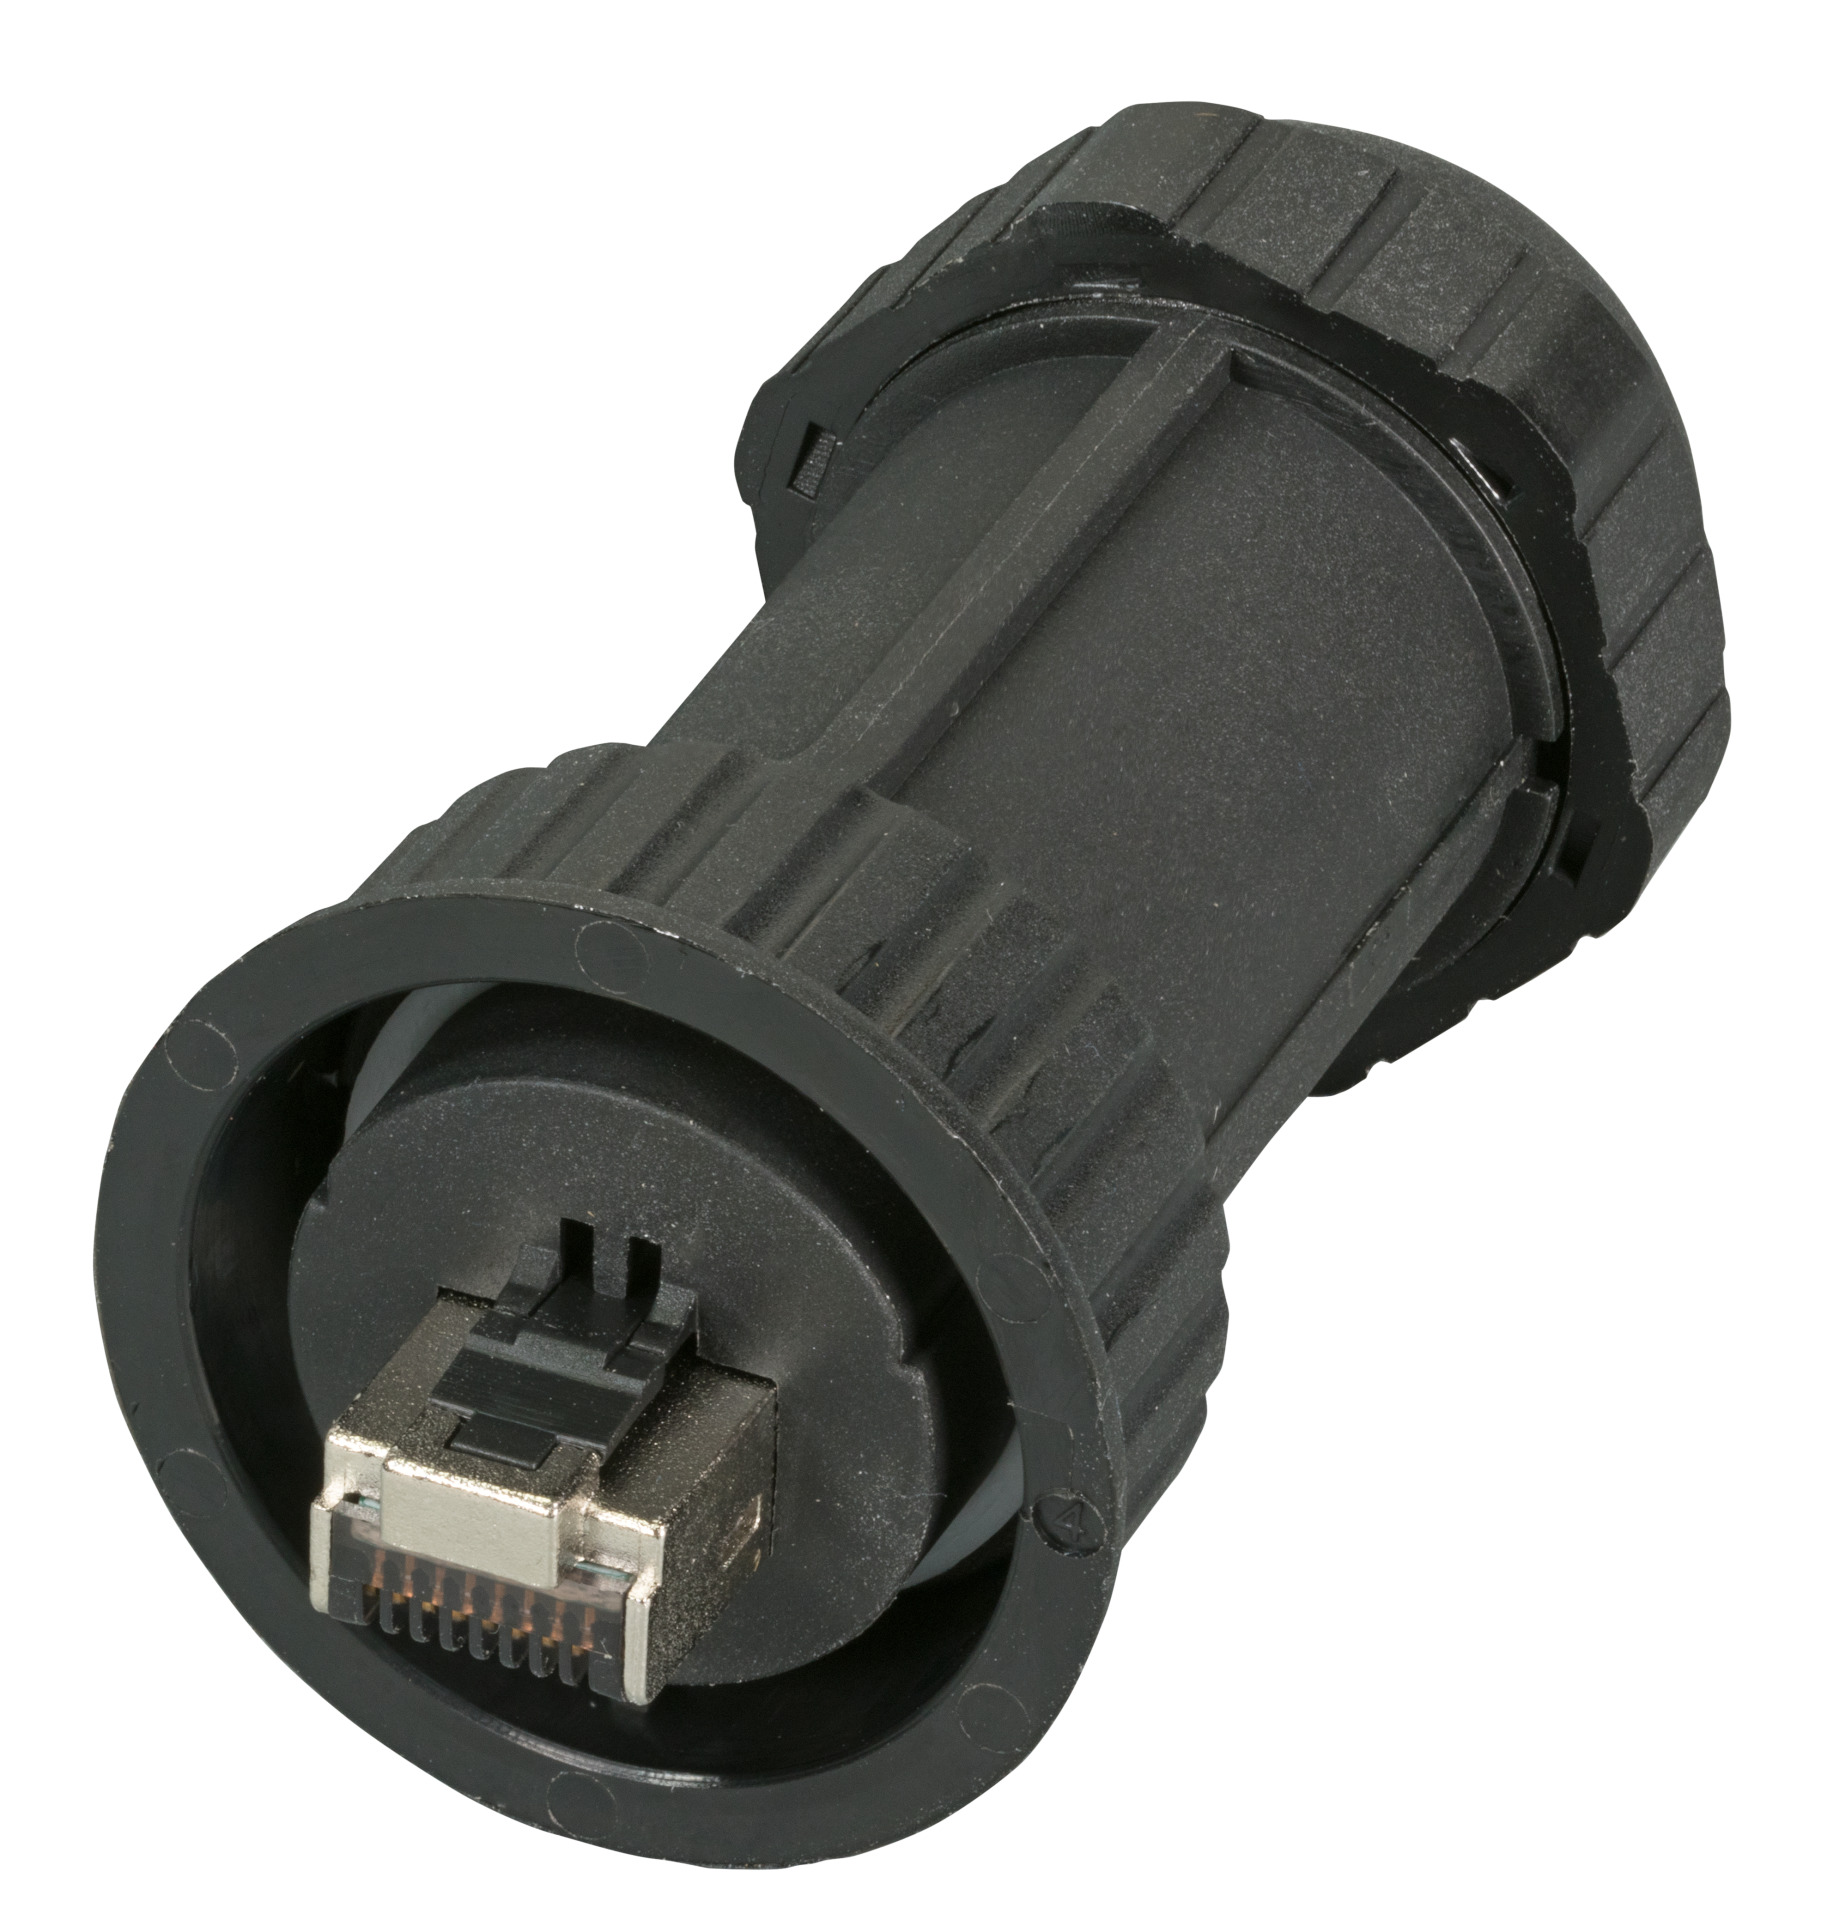 IP68 Cable gland for RJ45 field assembly plugs, sealing for 4.5-6.5mm OD